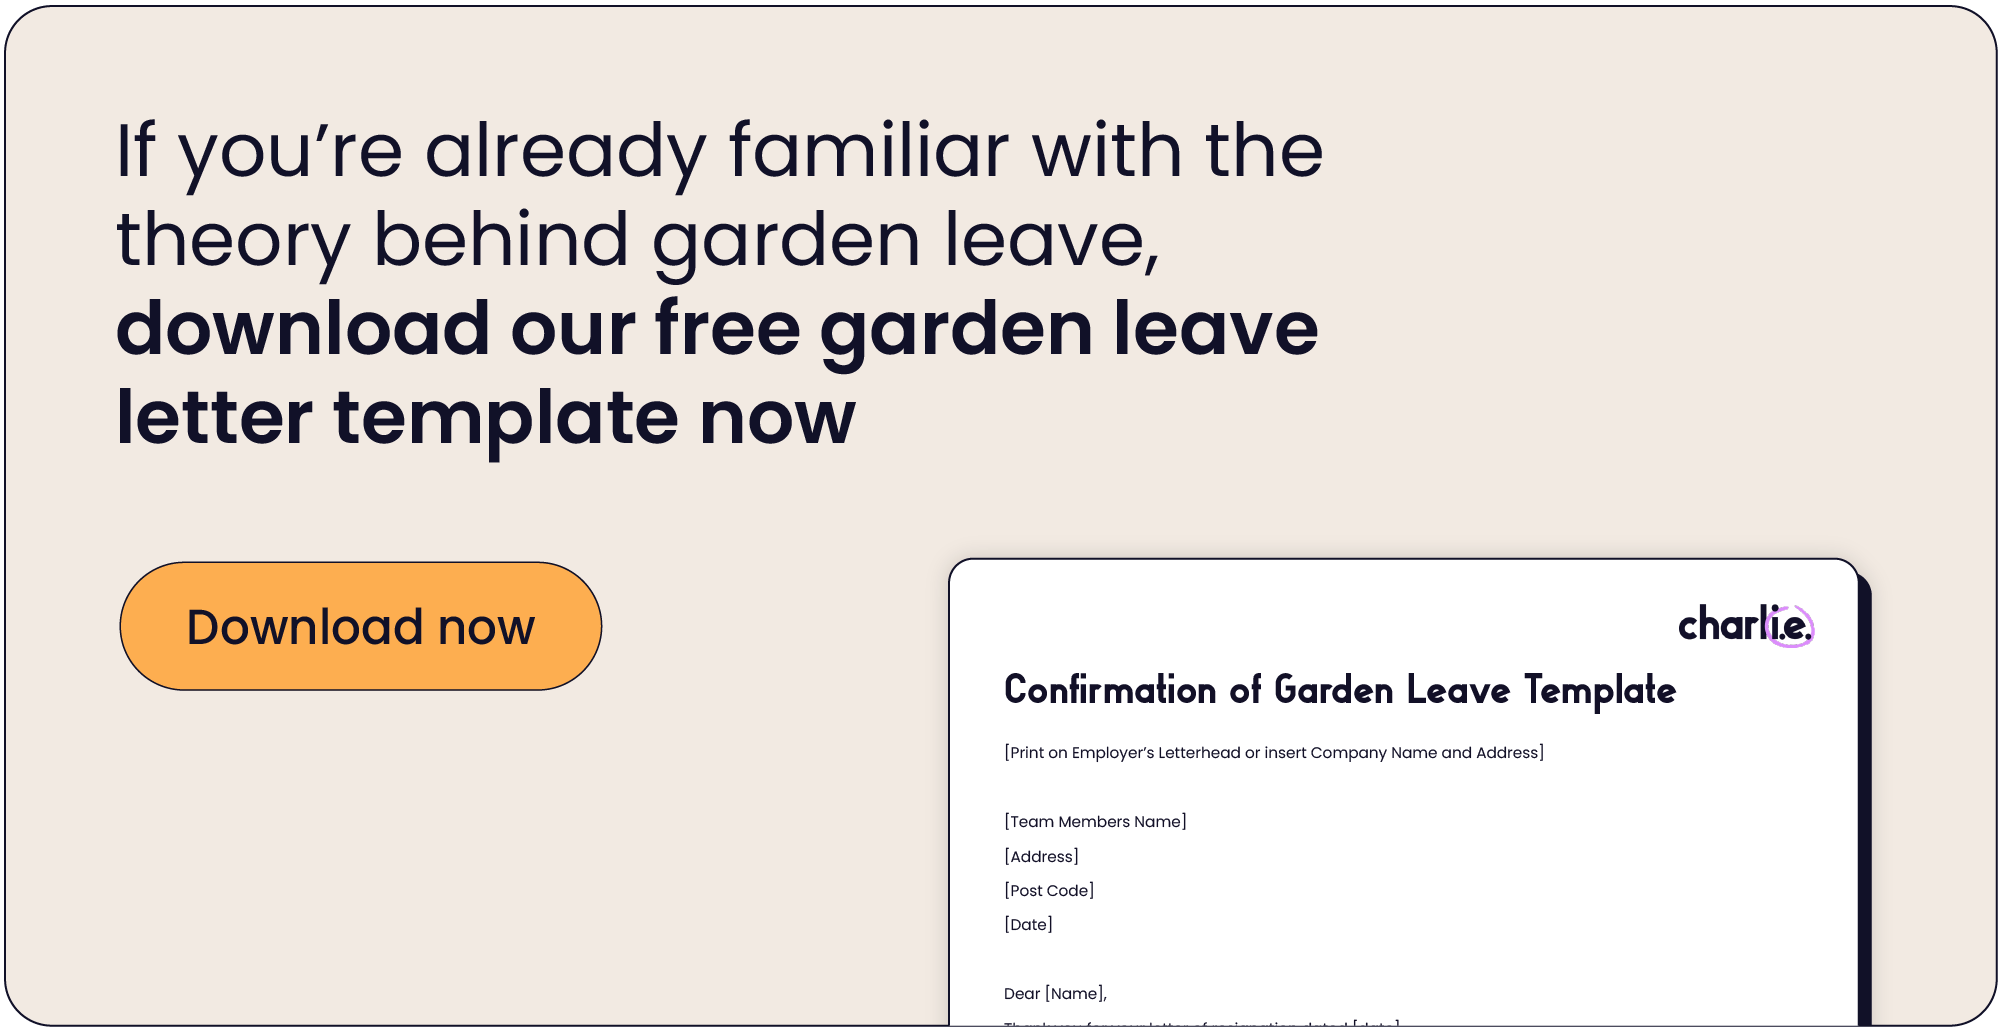 Download our garden leave letter template by clicking here